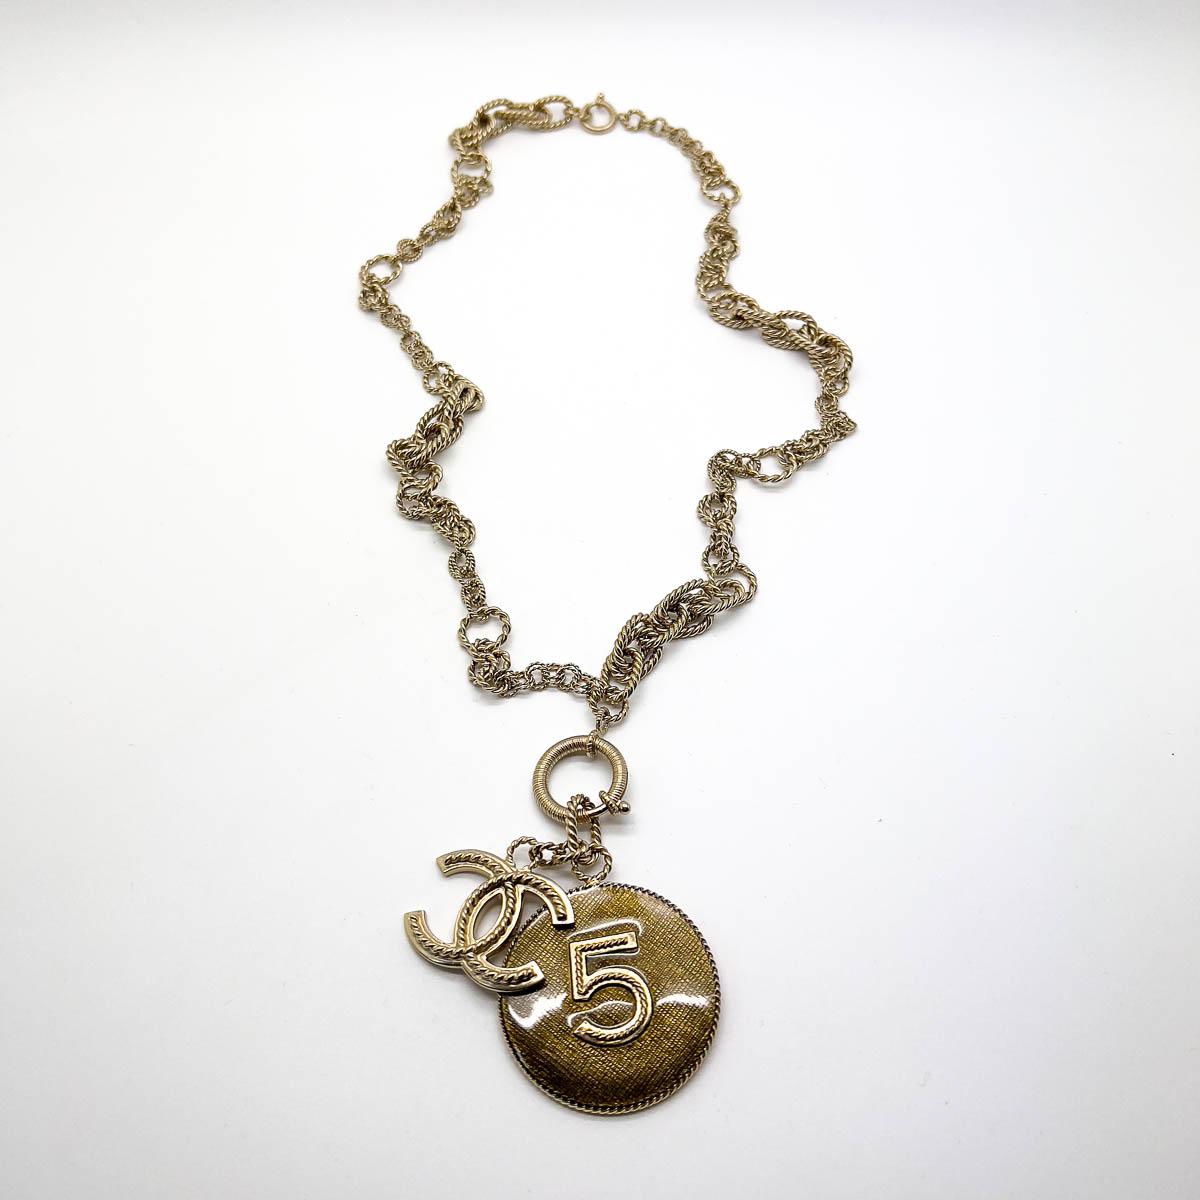 Vintage Chanel Statement No. 5 Rope Chain Charm Necklace 2013 For Sale 3